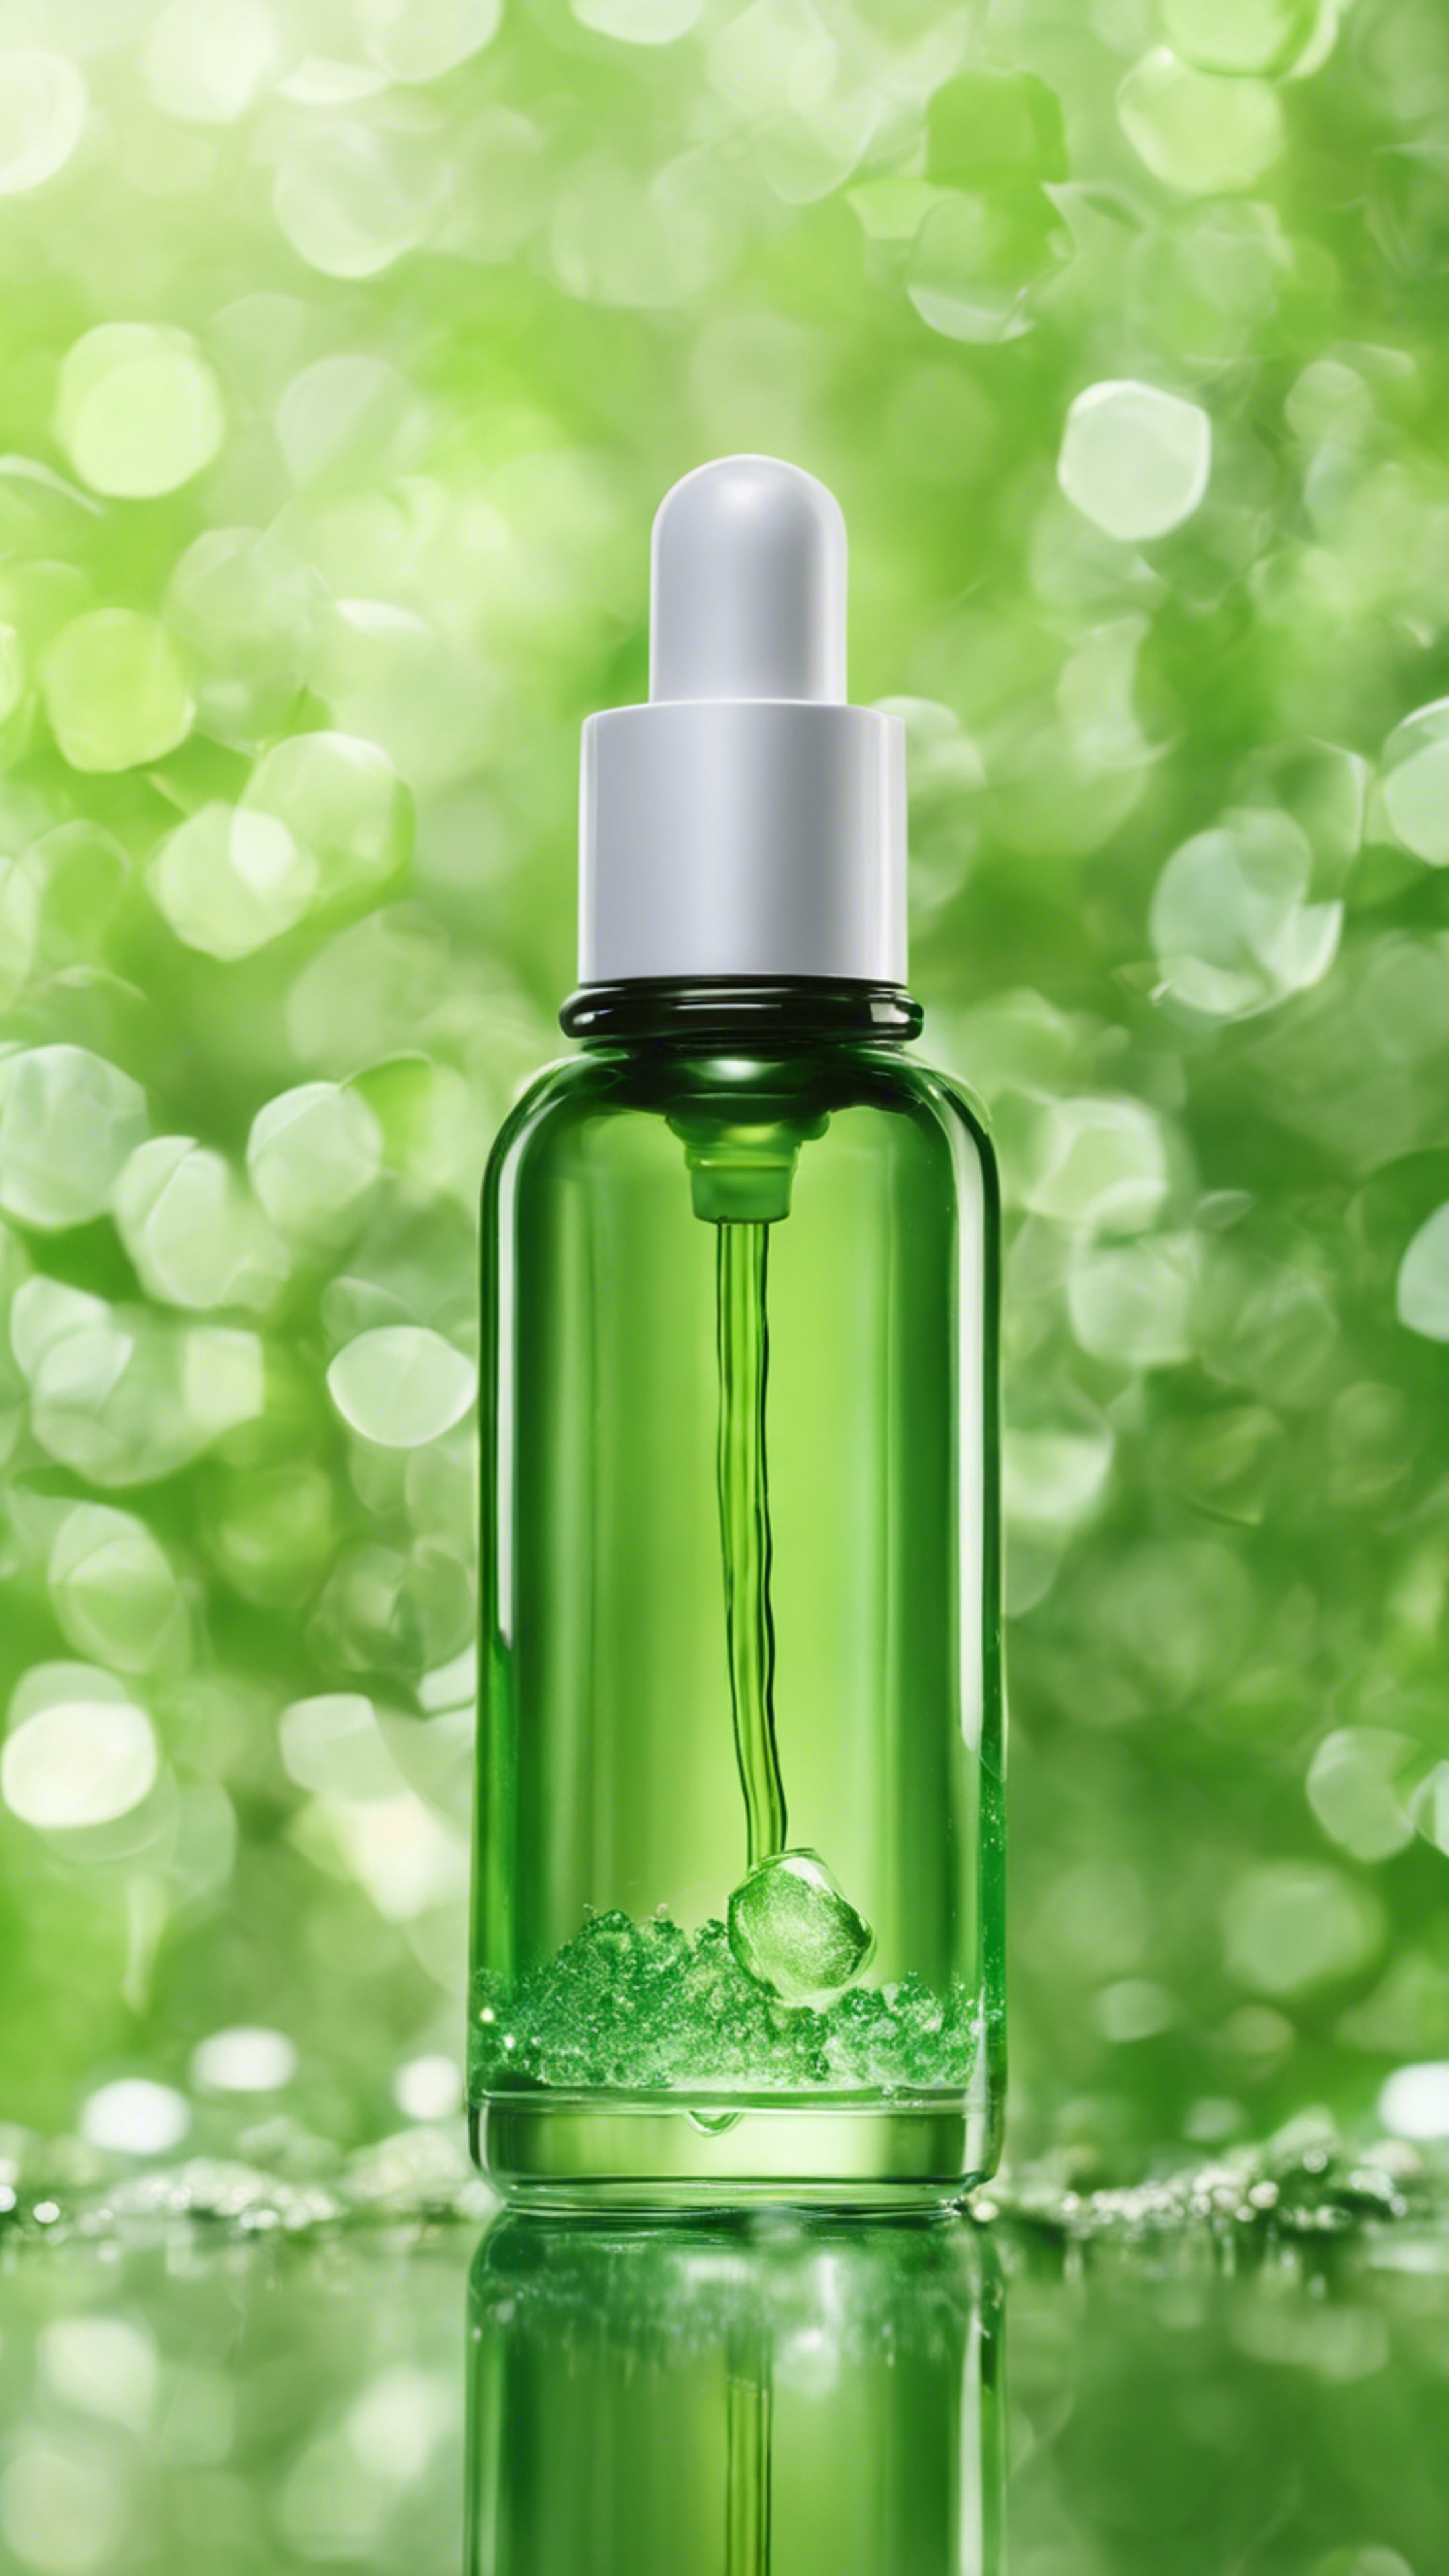 Green an eco-friendly cosmetics company's new hydrating face serum in a recyclable glass bottle. Обои[04a9344189e843ad9259]